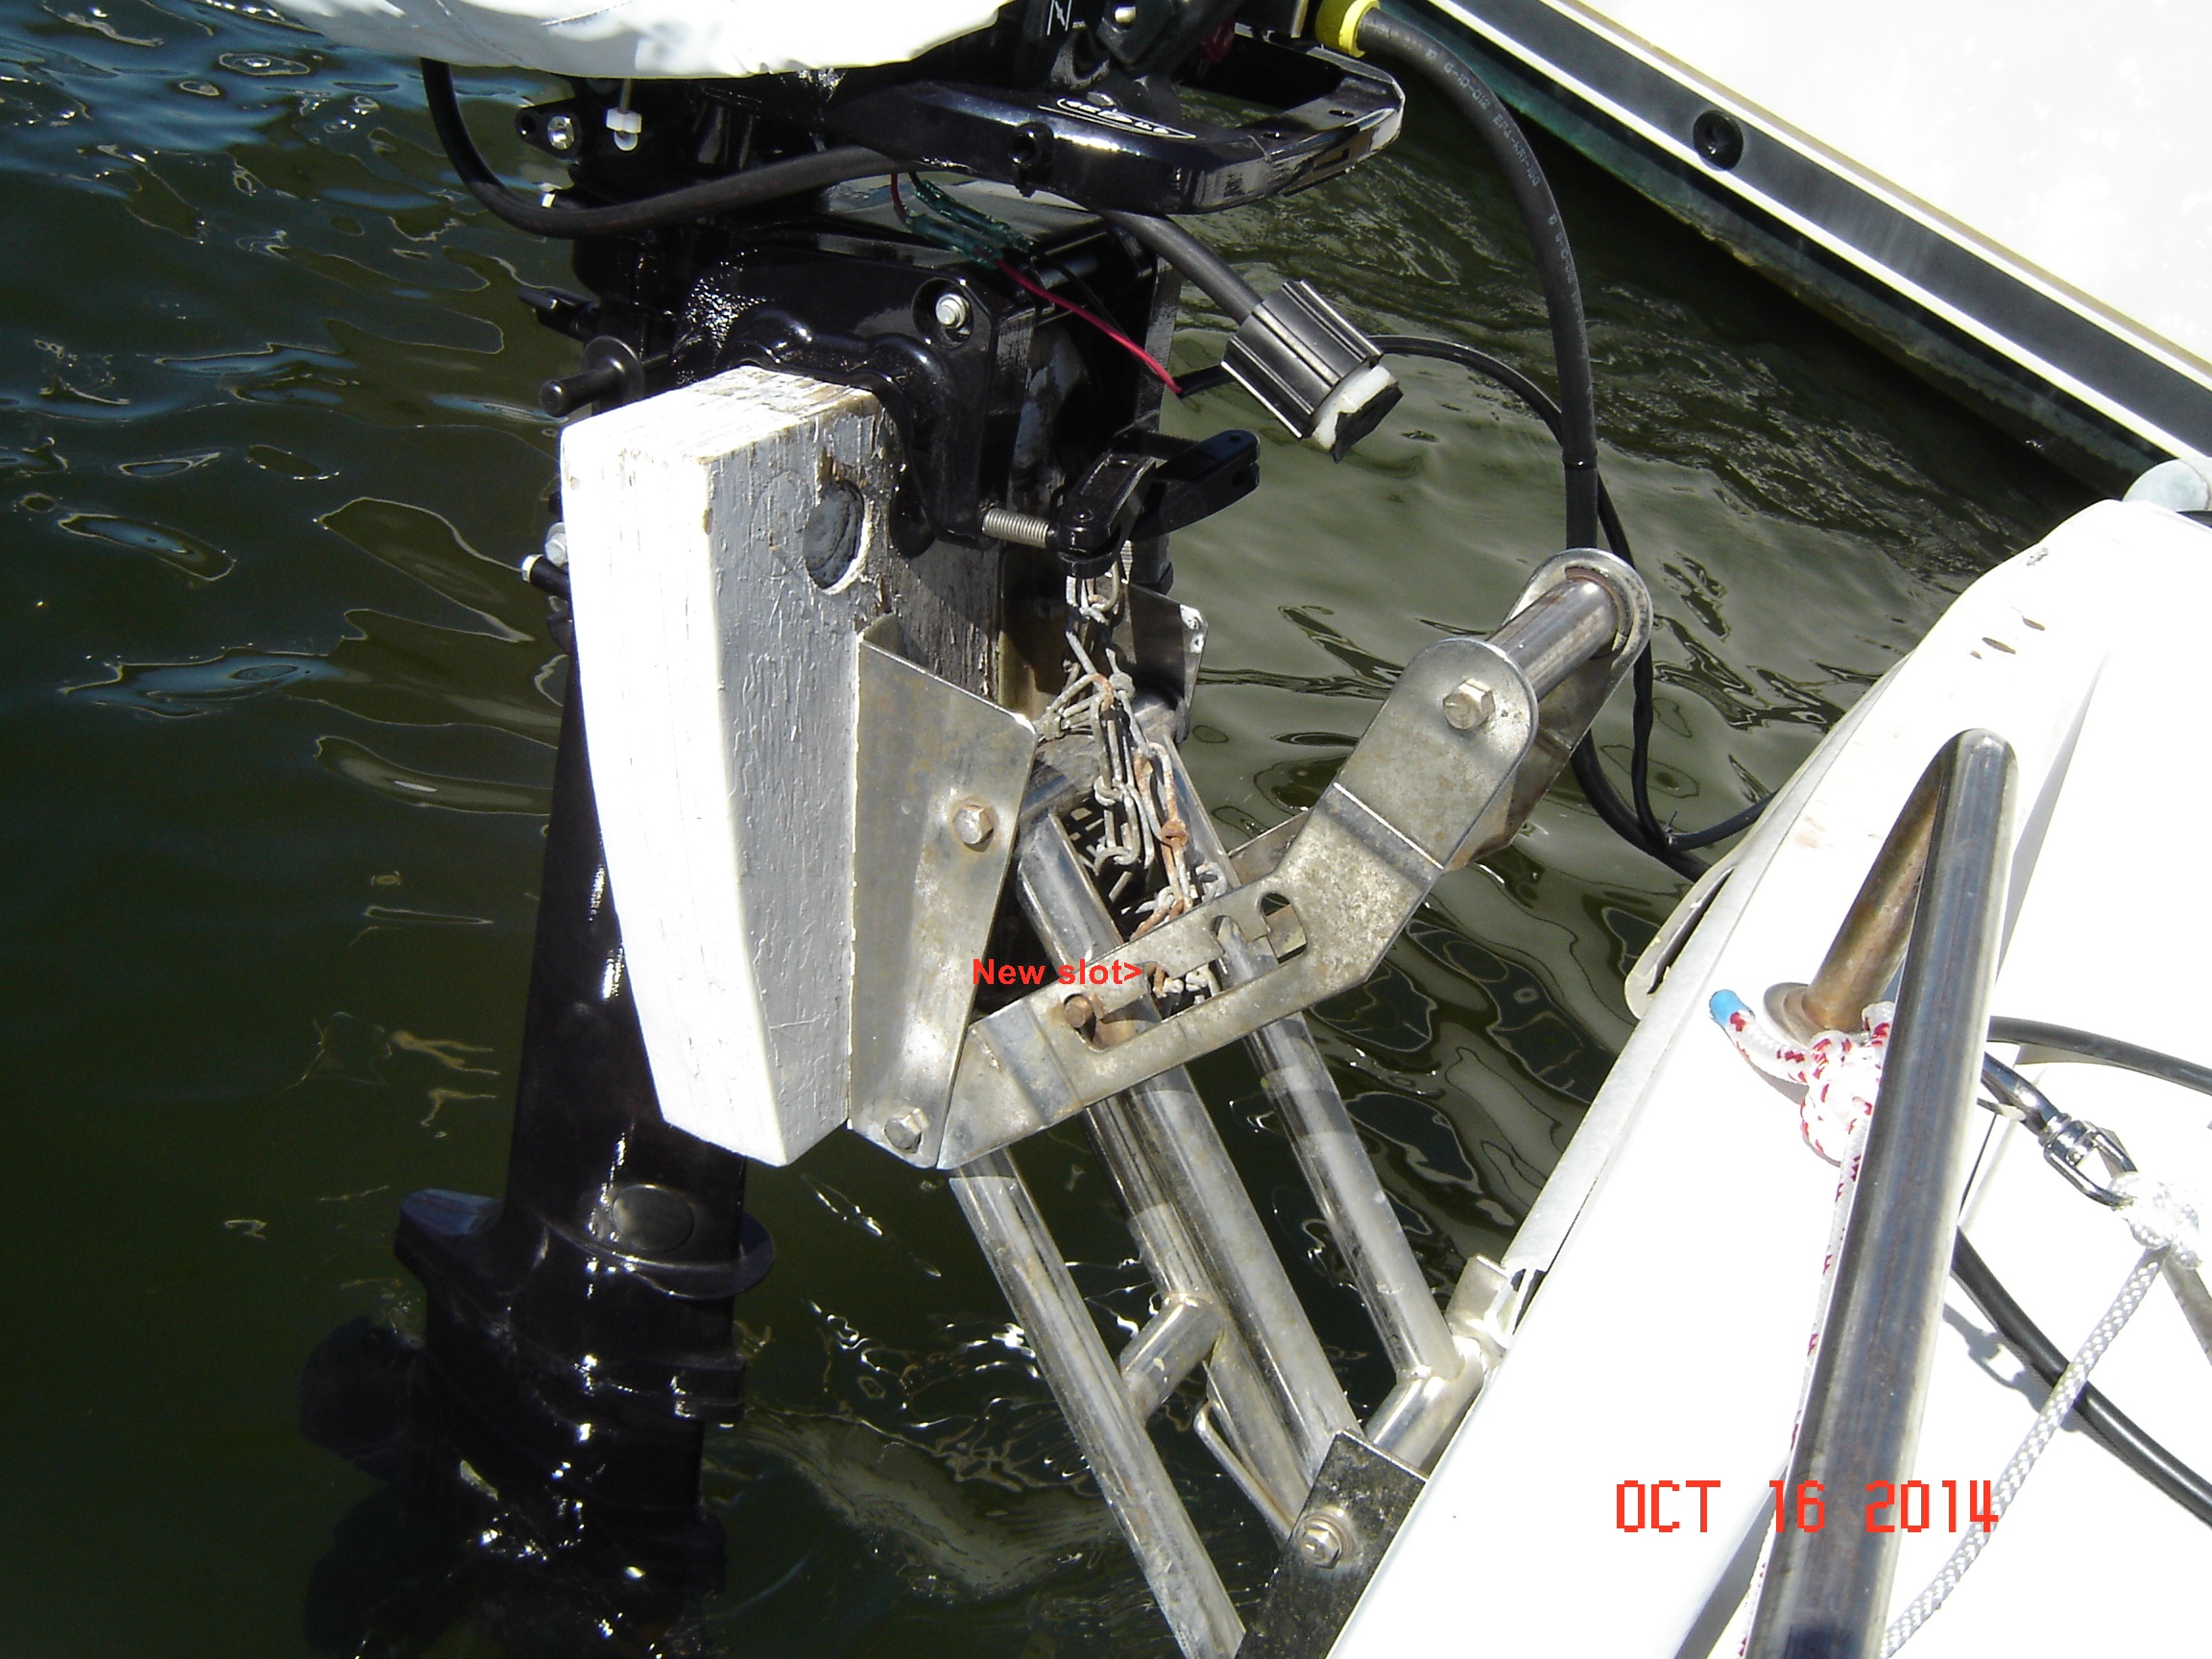 Motor water hose hook up outboard How do